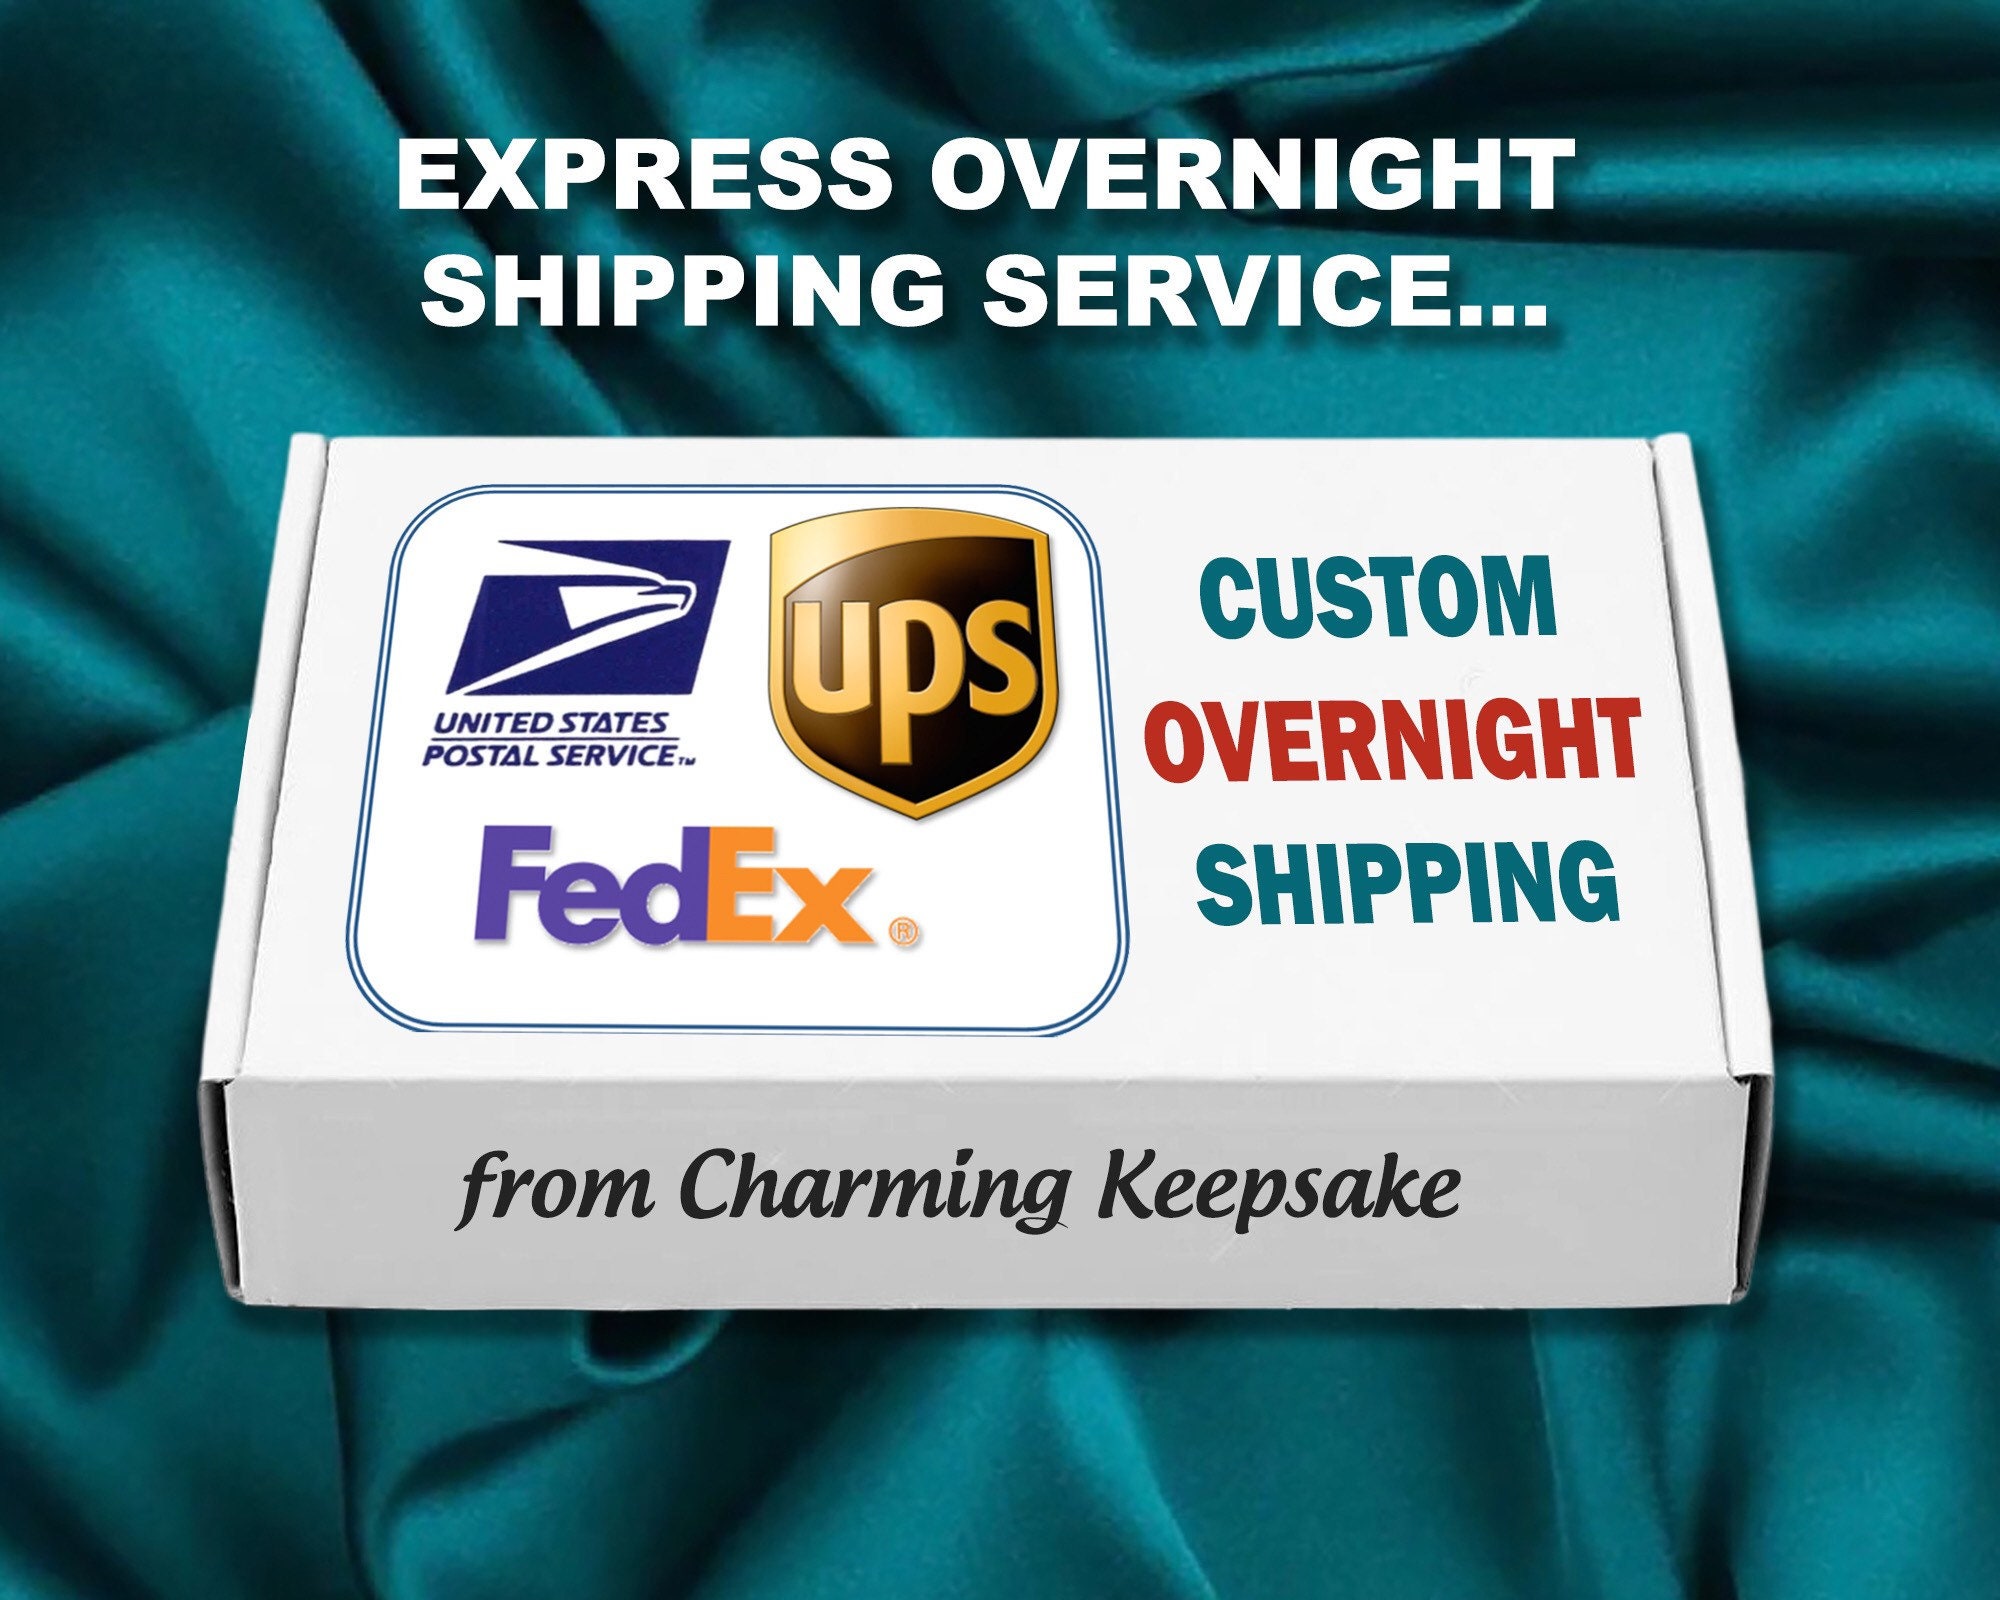 Expedited OVER NIGHT Shipping via UPS, FedEx, Priority Express